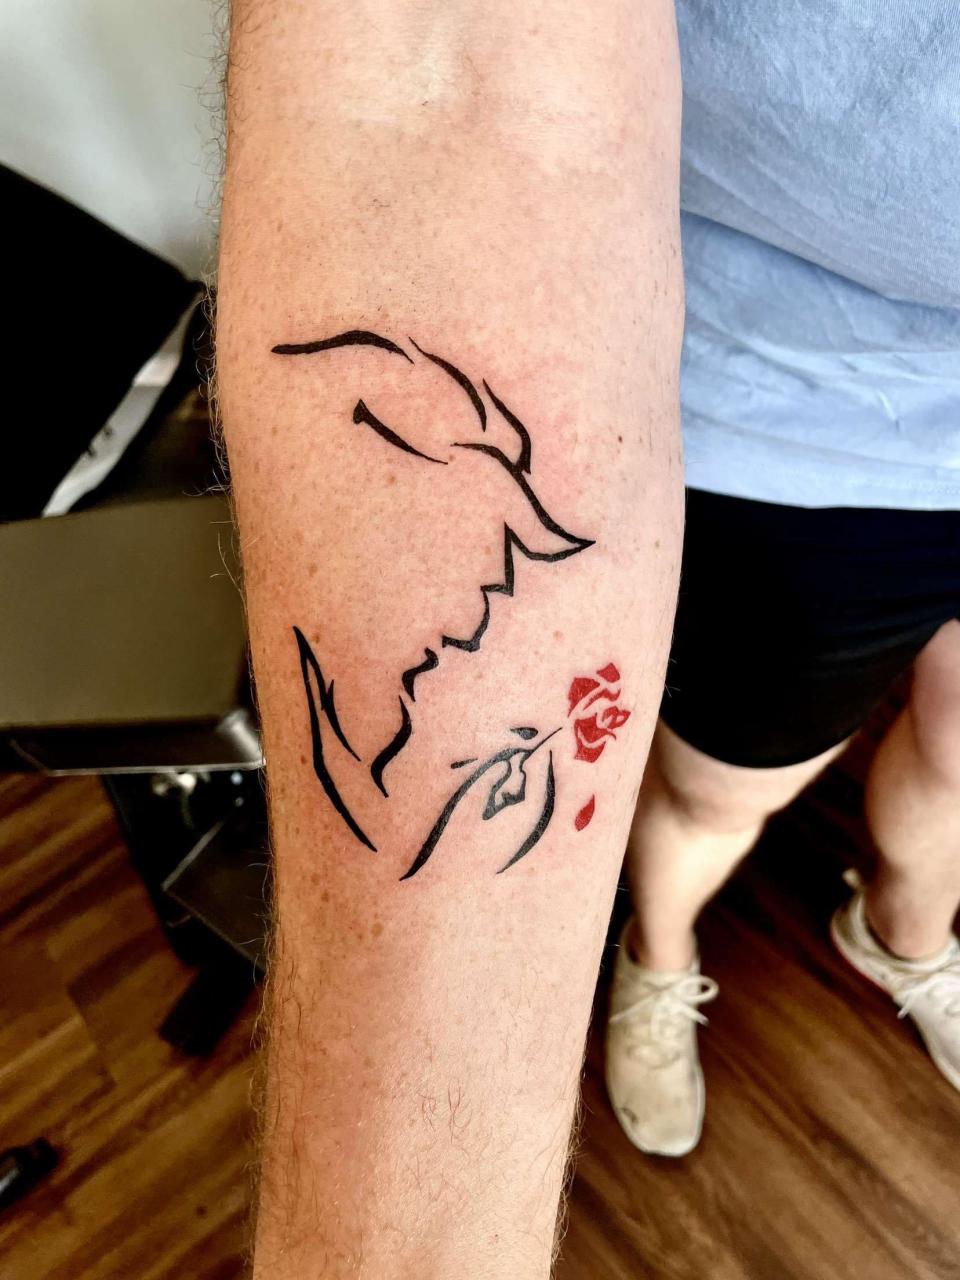 Two weeks before Springfield Little Theatre opened "Beauty and the Beast," Robert Hazlette got a tattoo of The Beast. Now 32, Hazlette has dreamt of playing The Beast since he was 18. He graced the stage in this role for the first time at The Landers Theatre on Thursday, June 8, 2023.